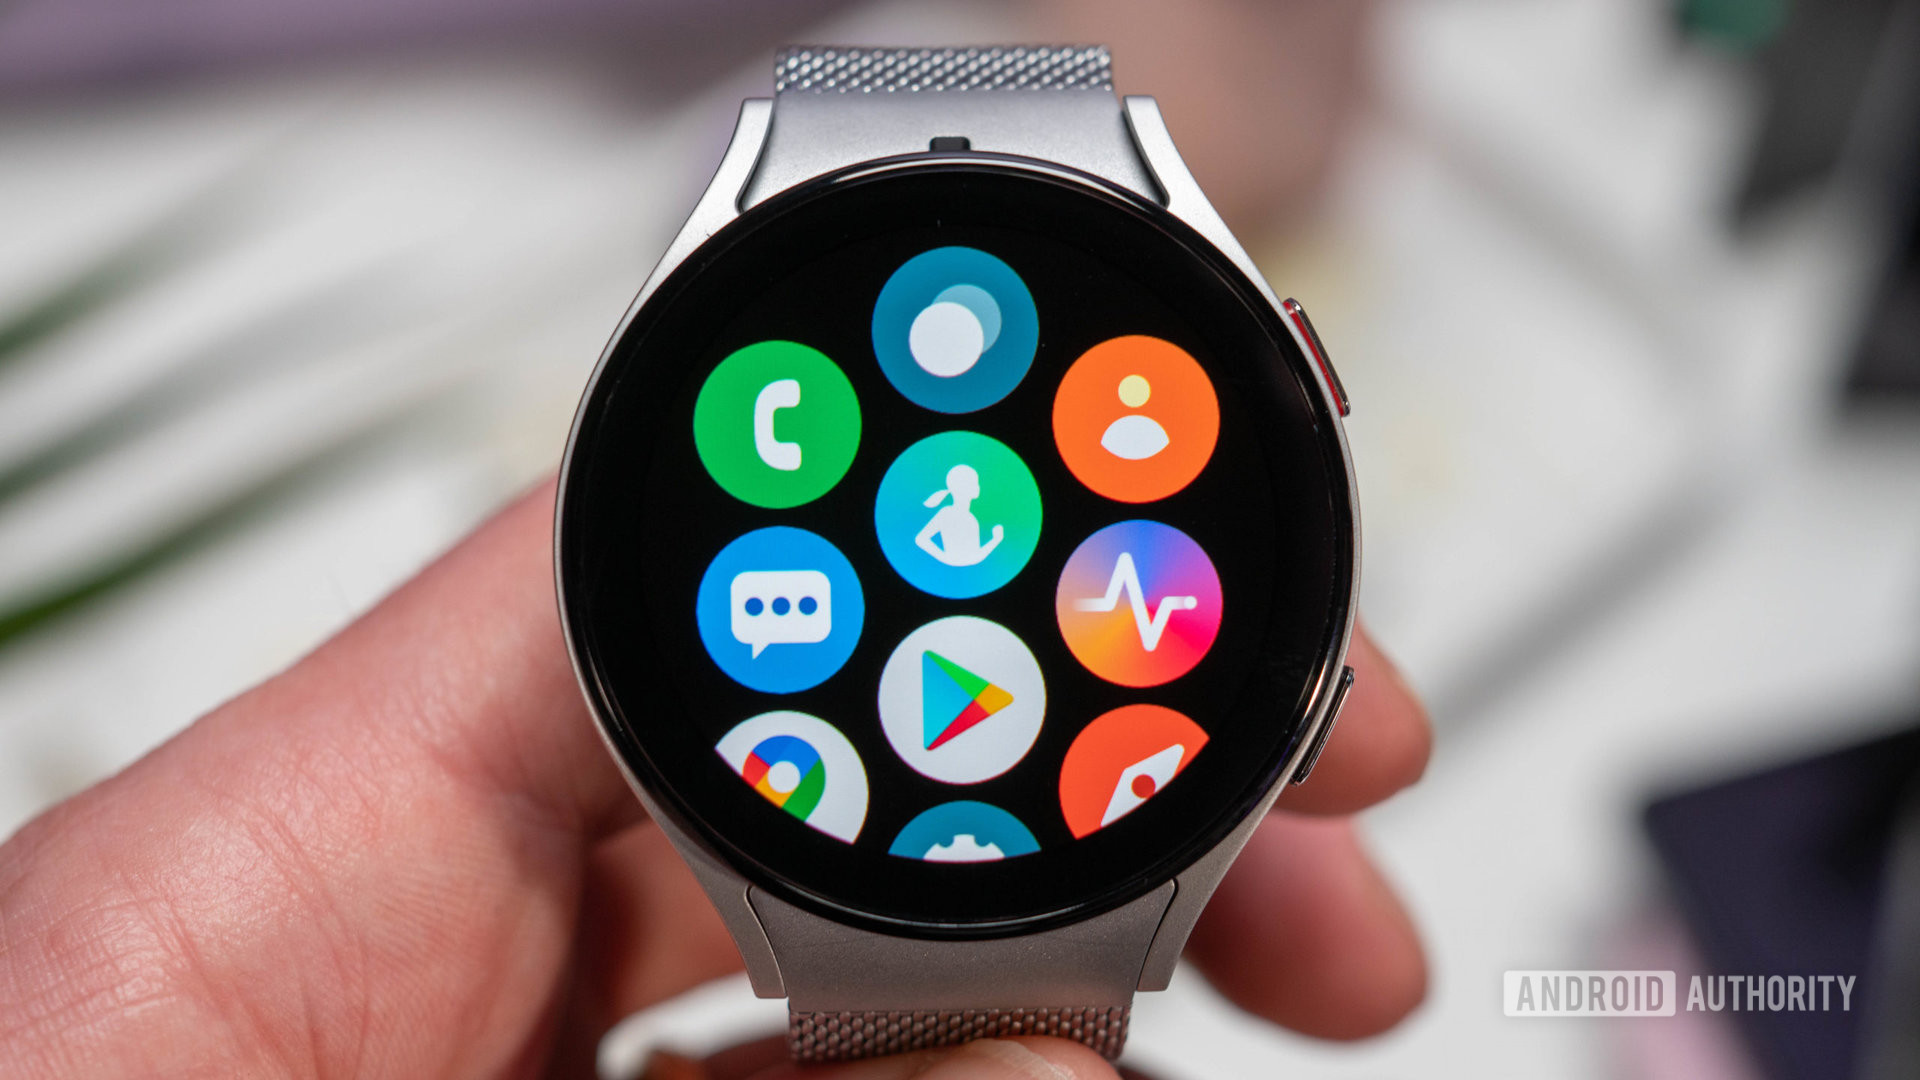 Samsung Galaxy Watch 5 in silver color with metal bracelet on hand showing apps close-up